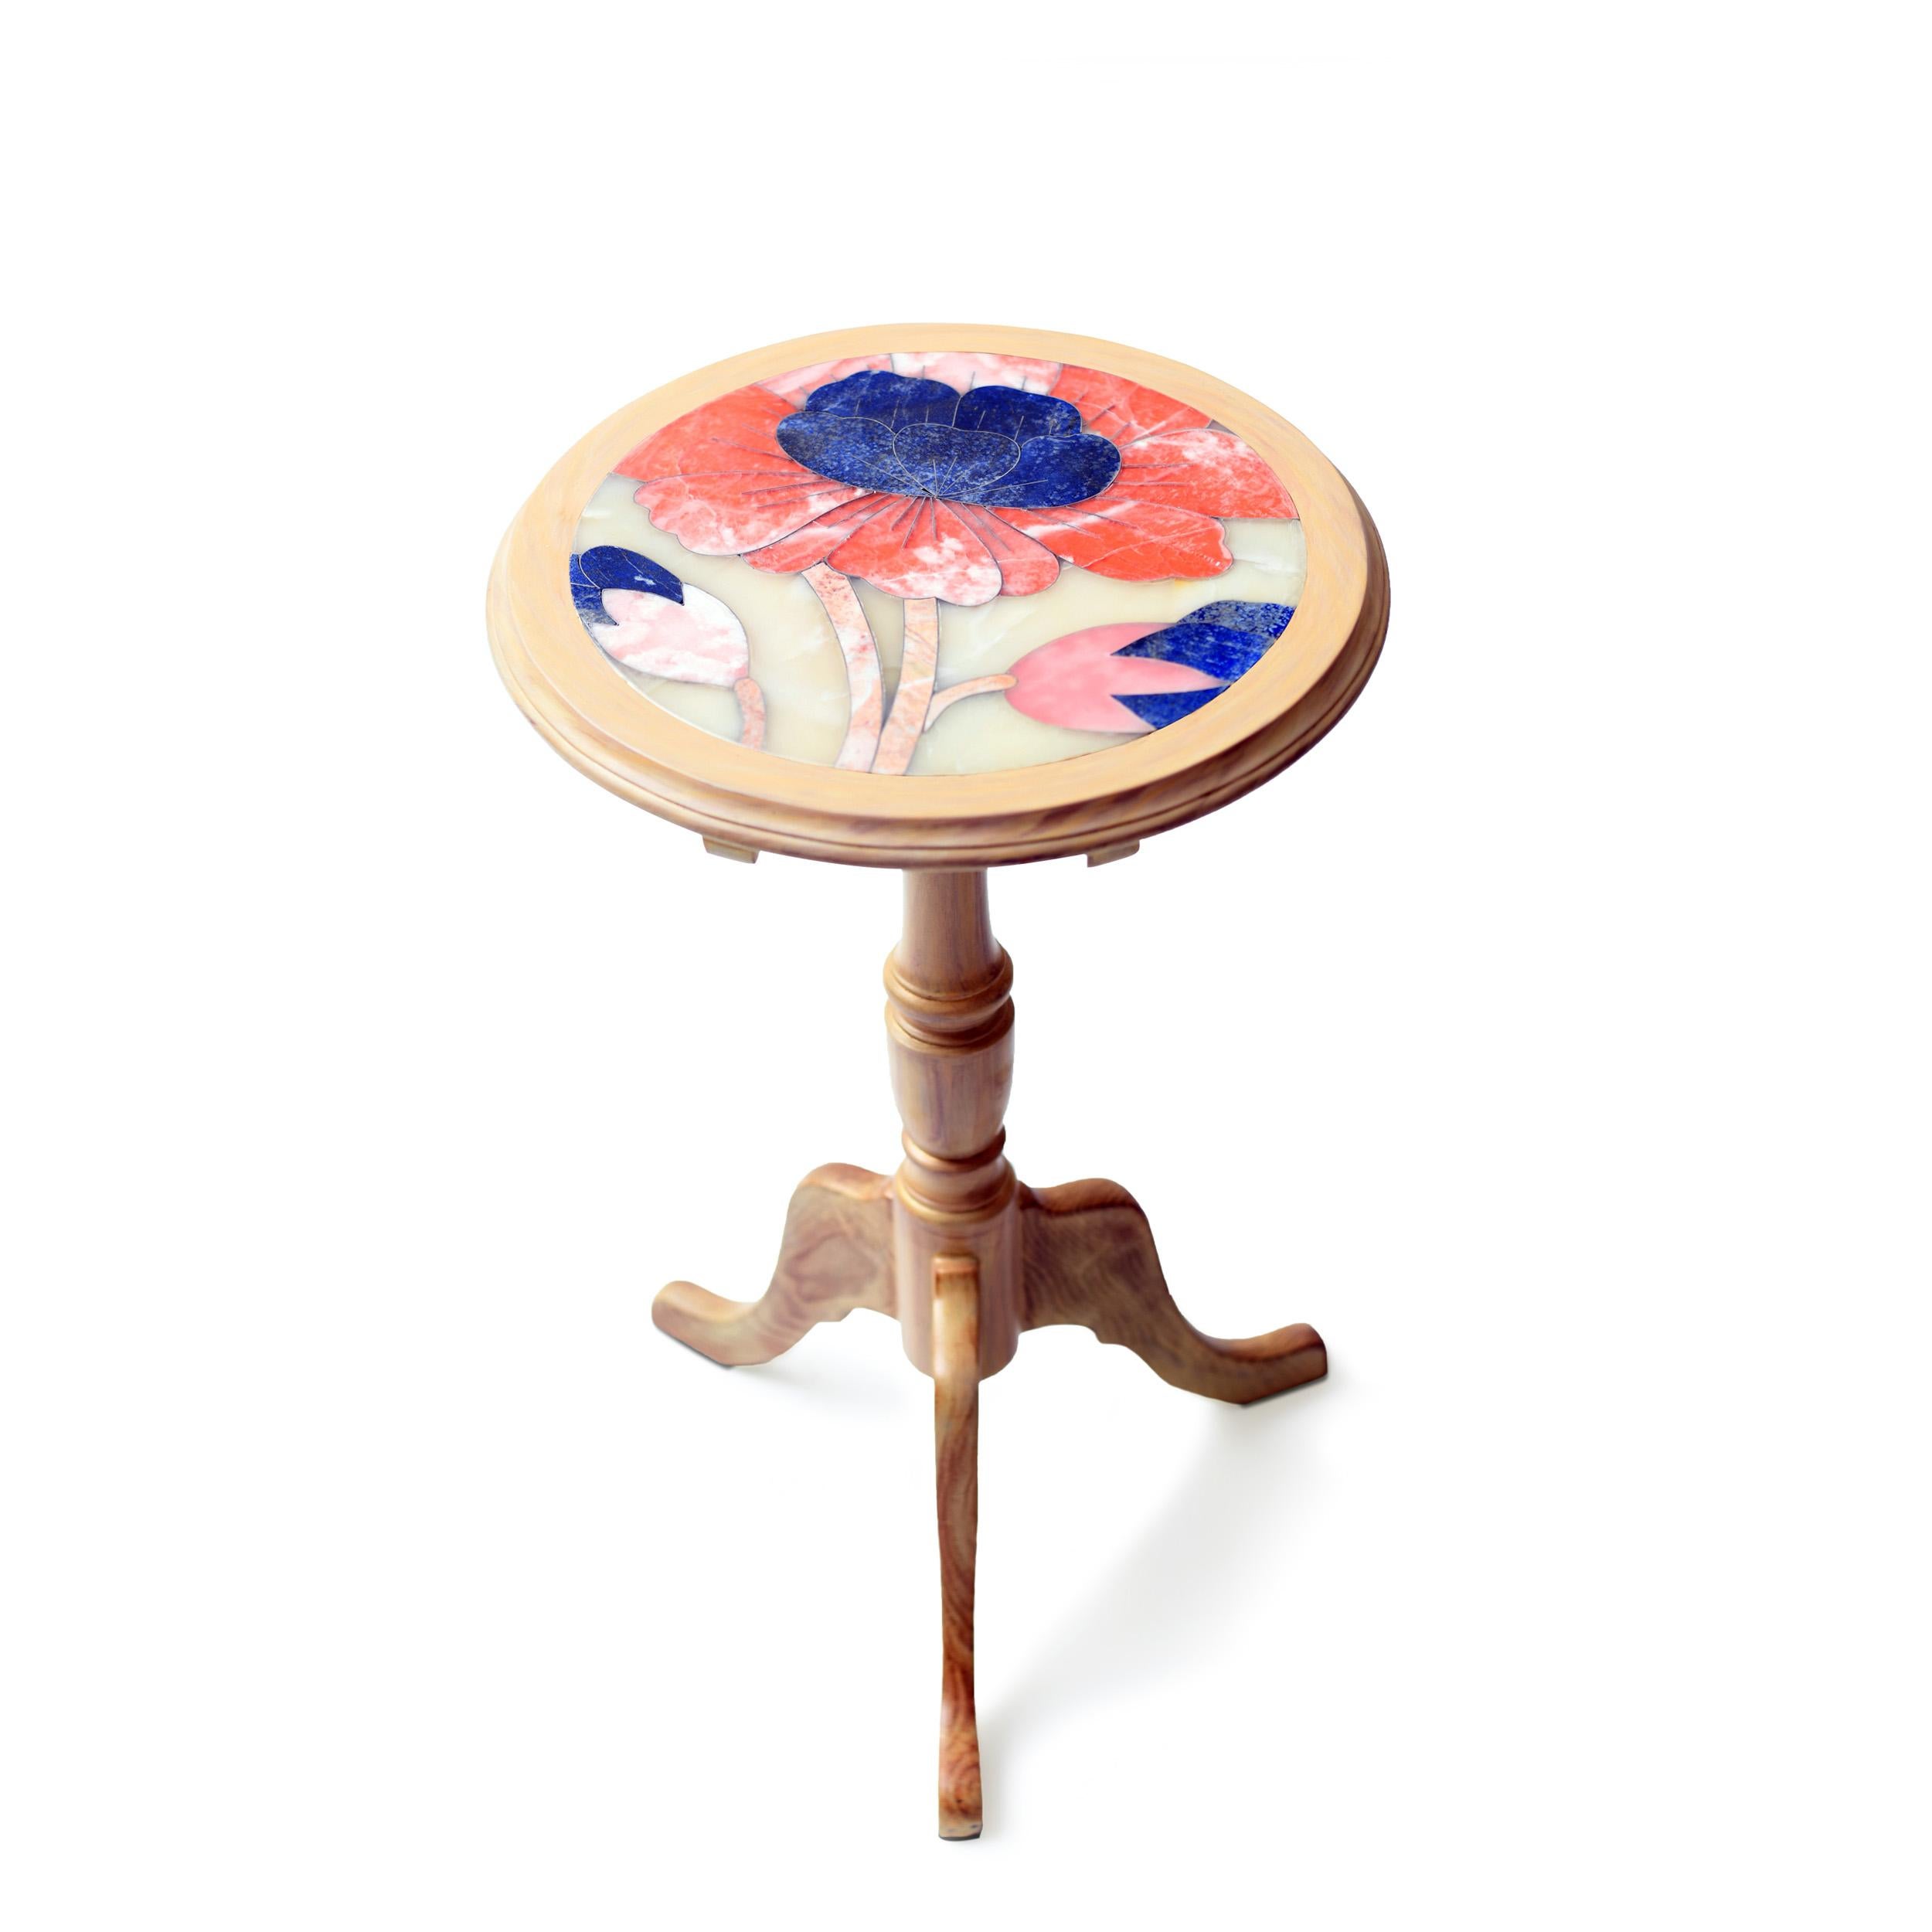 Puvvi Tilt-Top Pink Side Table by Studio Lel
Dimensions: D46 x W46 x H66 cm
Materials:Lapis Lazuli, Onyx, Marble, Wood

From the Urdu word for the chrysanthemum flower, our Vogue-featuring Puvvi collection is a lively celebration of femininity.